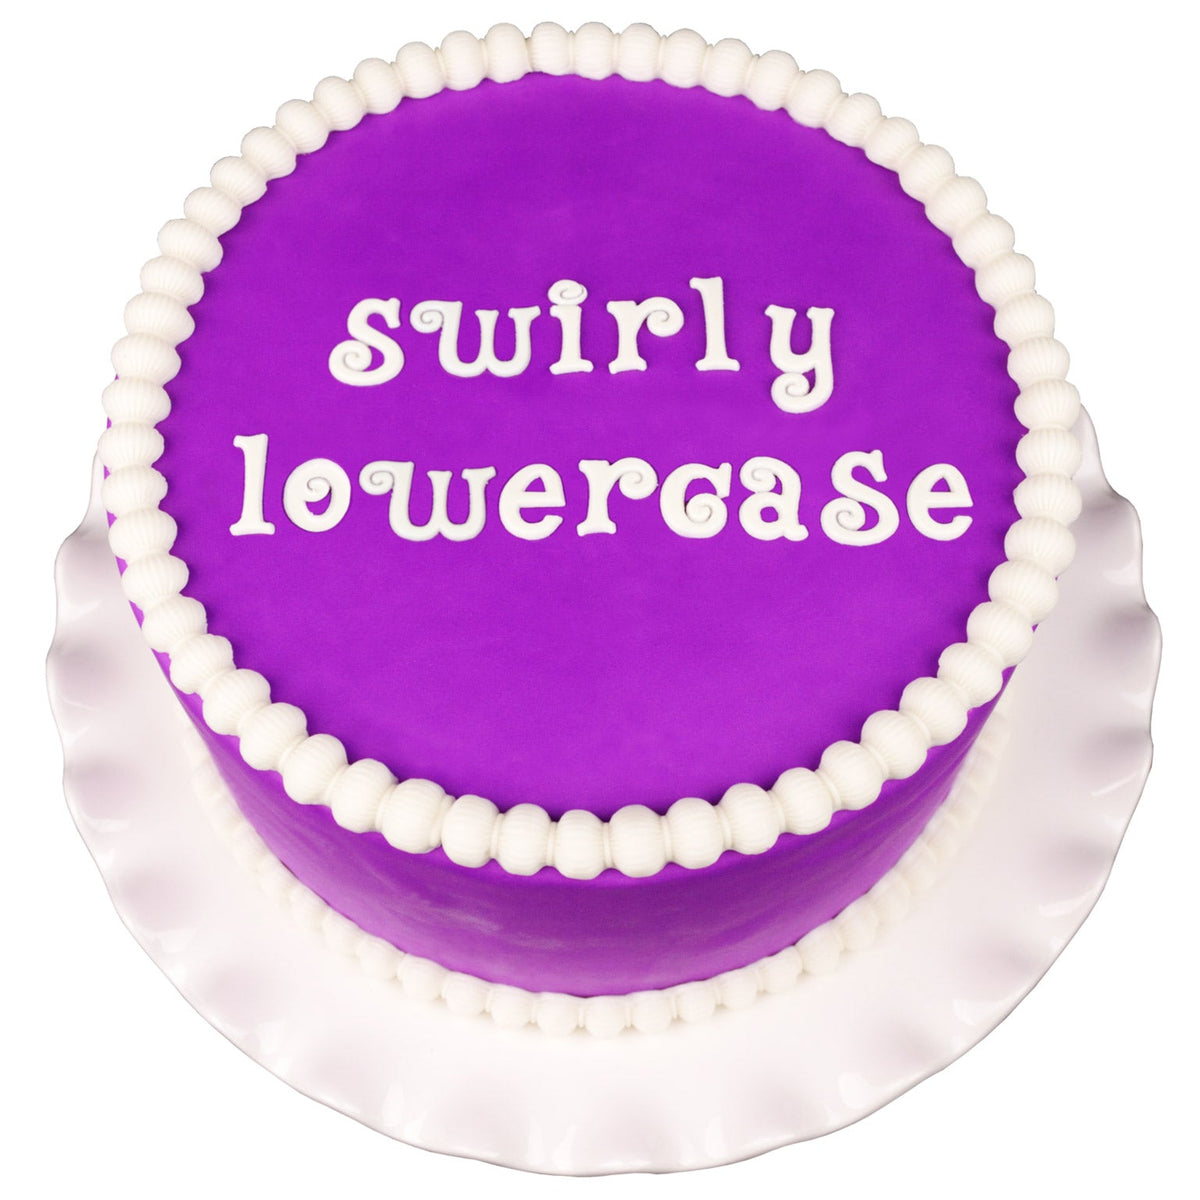 Decorated Cake using Swirly Lowercase Flexabet Food Safe Silicone Letter Maker by Marvelous Molds